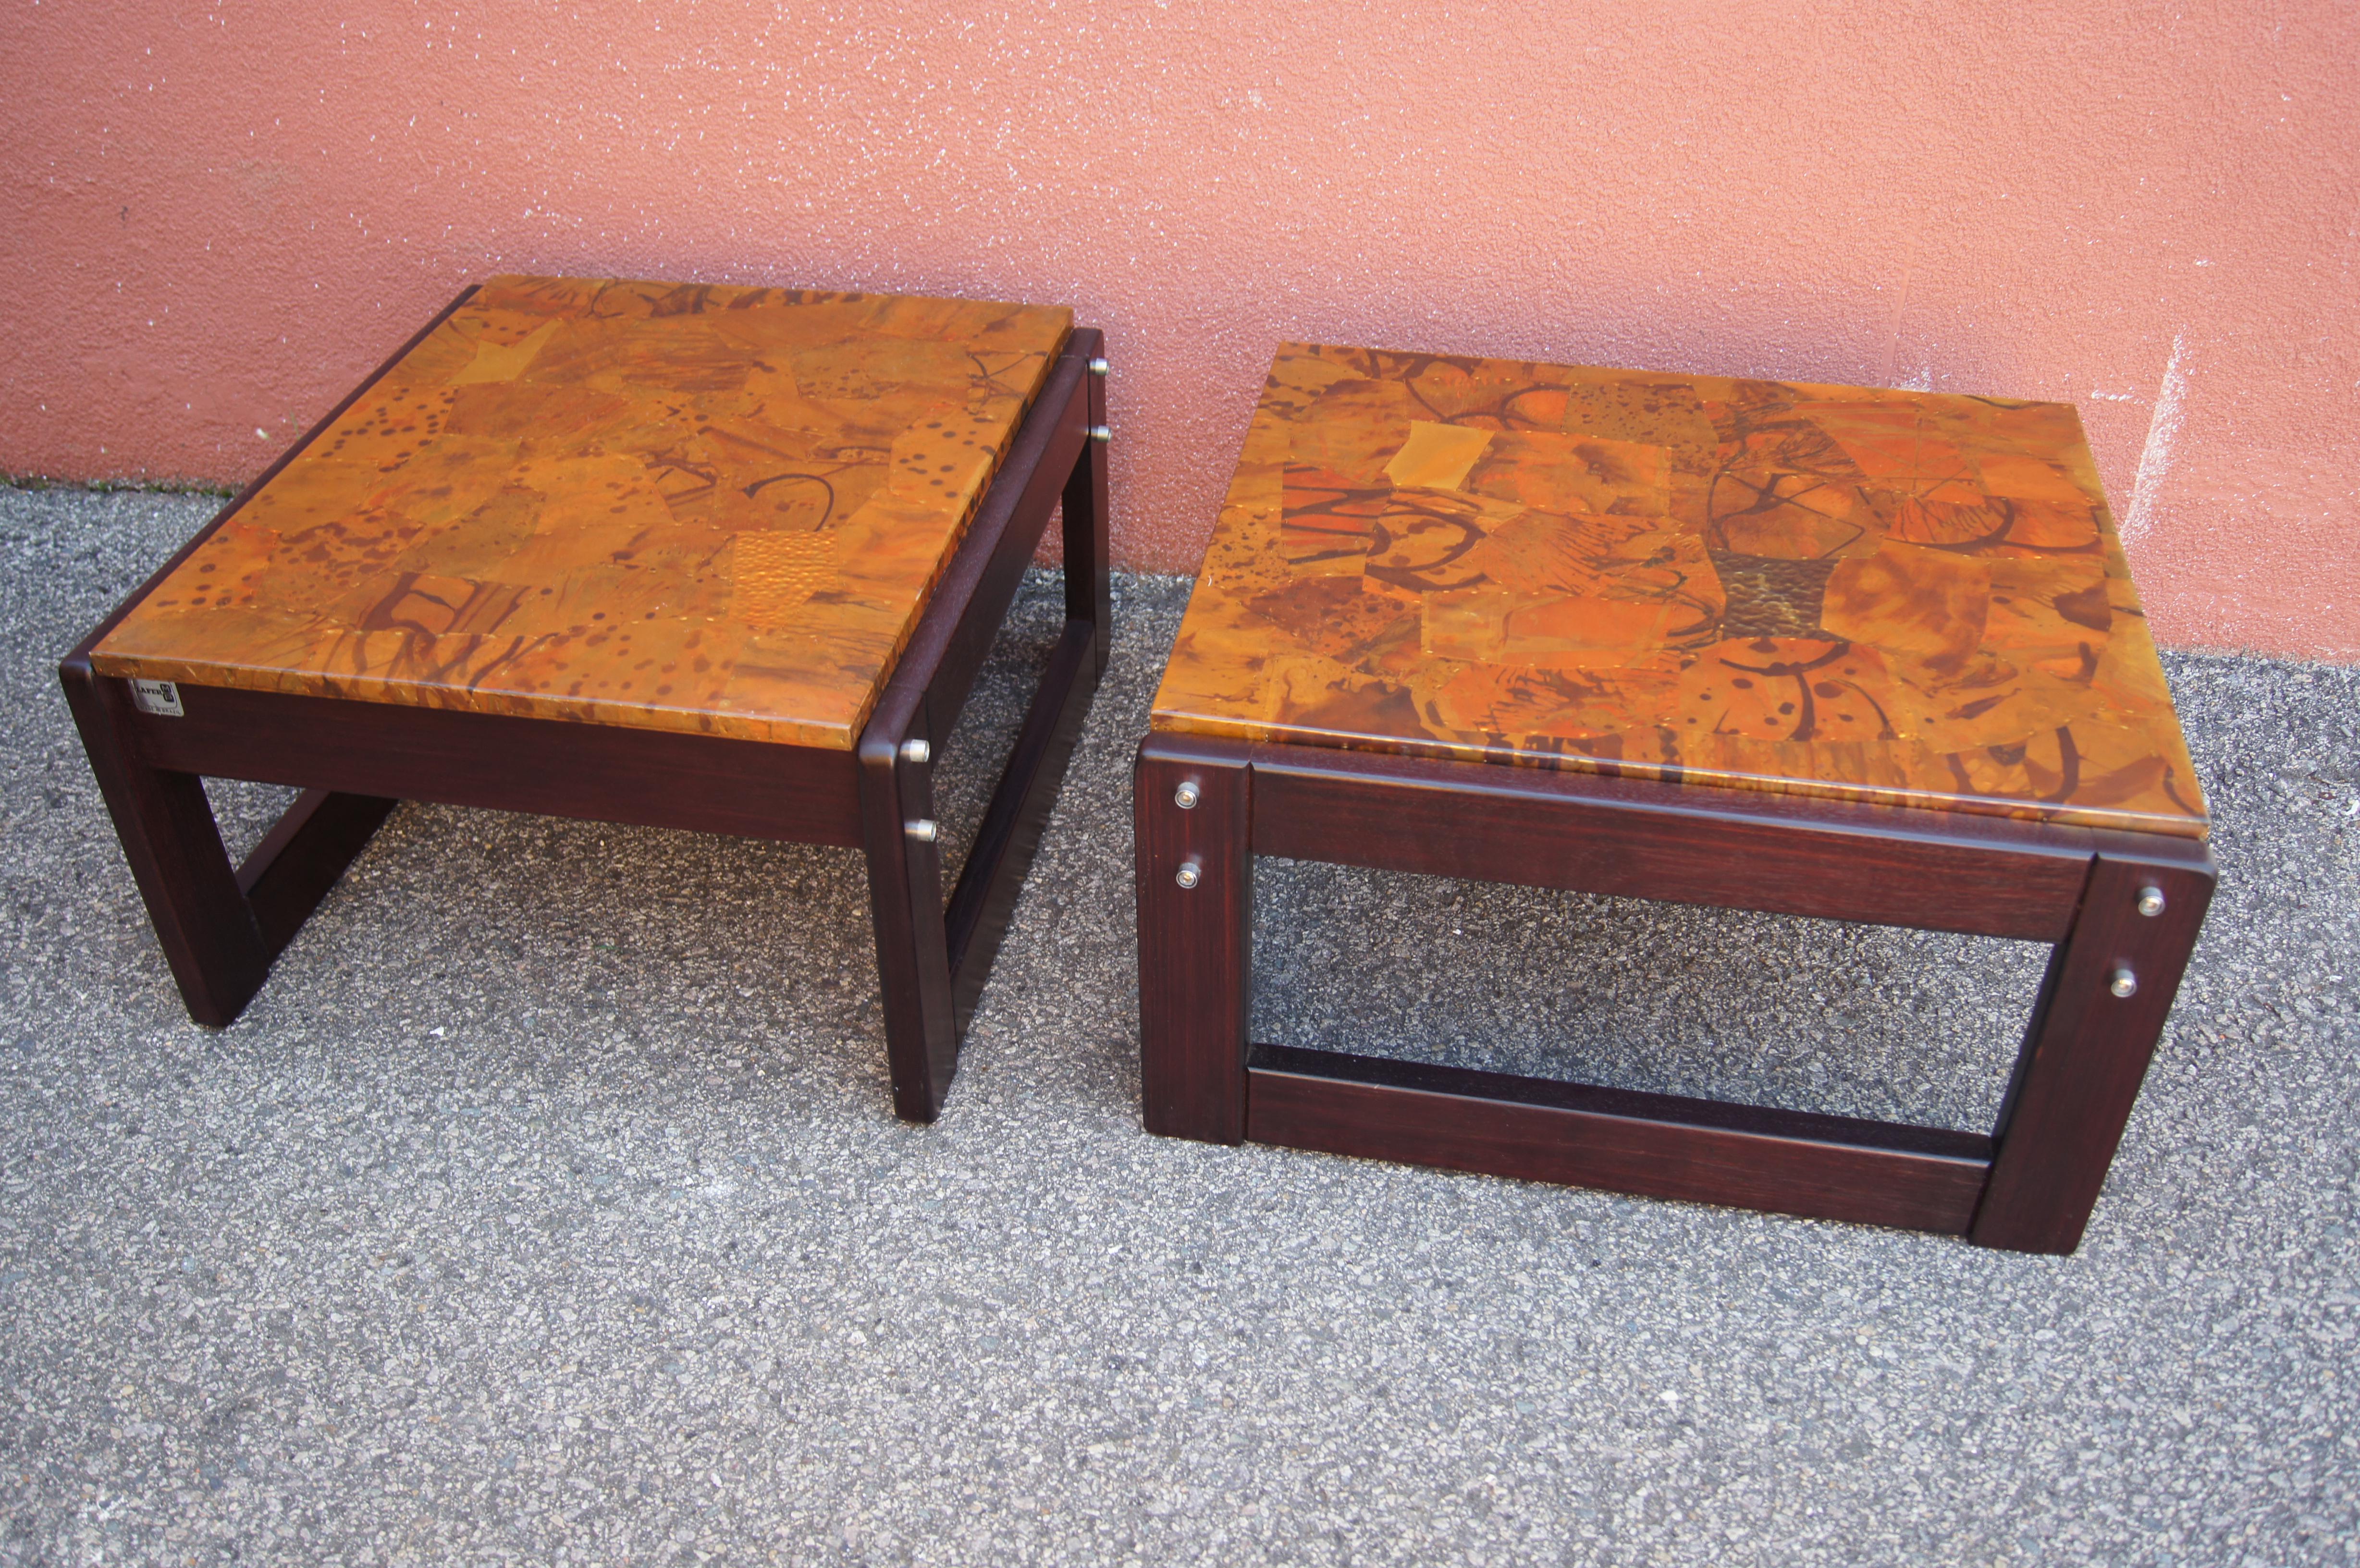 Designed by Brazilian modernist Percival Lafer, this pair of jacaranda rosewood side tables features bold rectangular frames with exposed hardware and tops of beautifully patinated patchwork copper. 

Lafer label on frame.

We have a corresponding